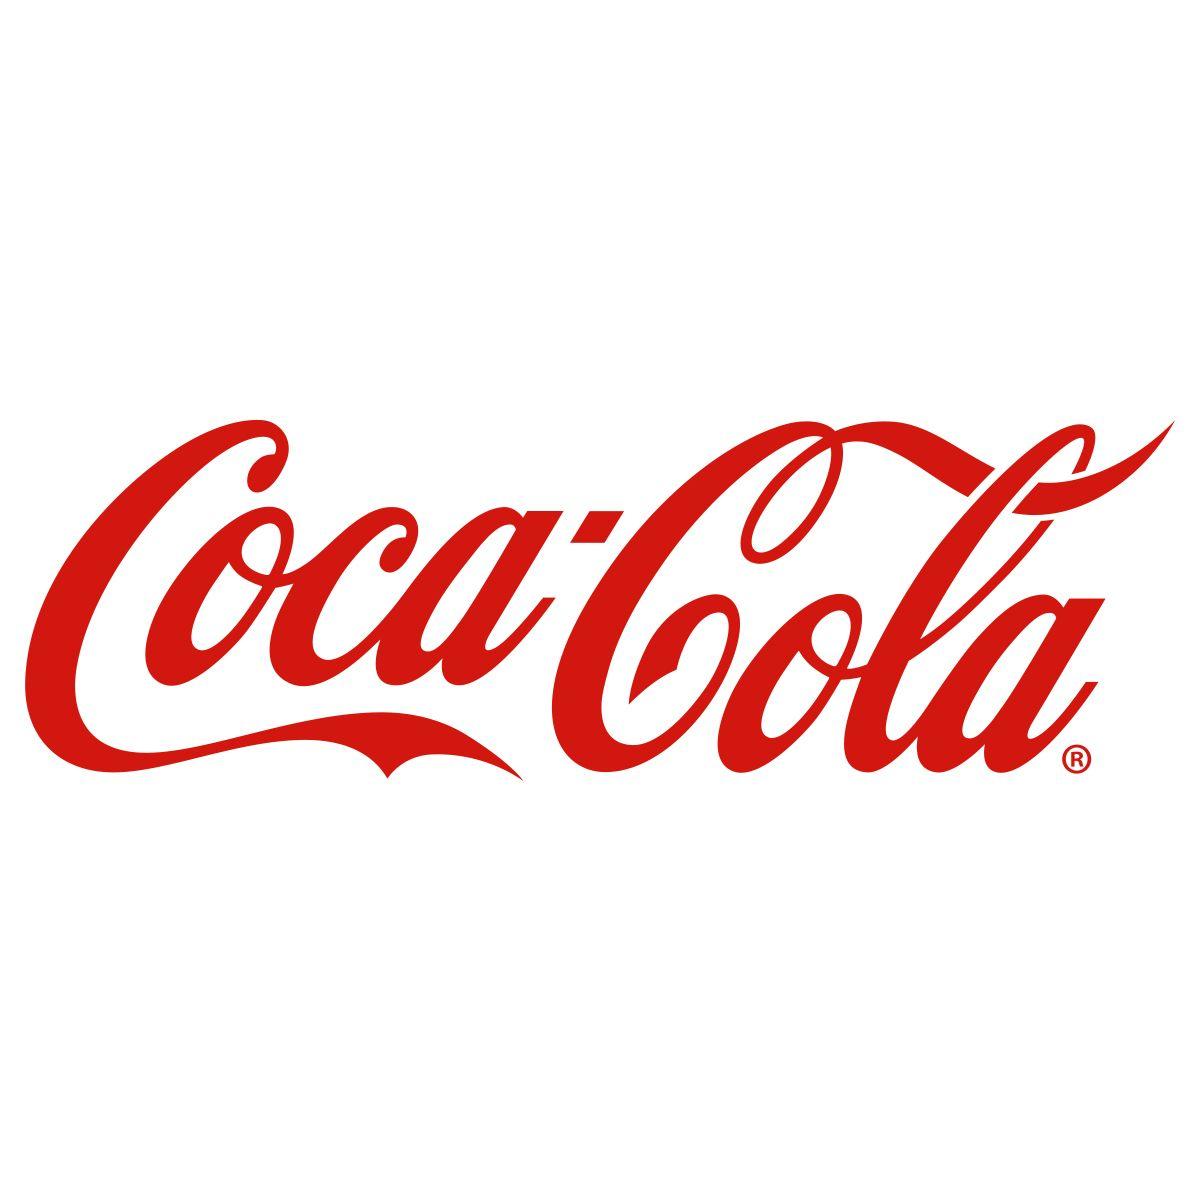 1910s Logo - Coca-Cola Script Logo Cut Out Vinyl Decal 1910s Style in 2019 ...